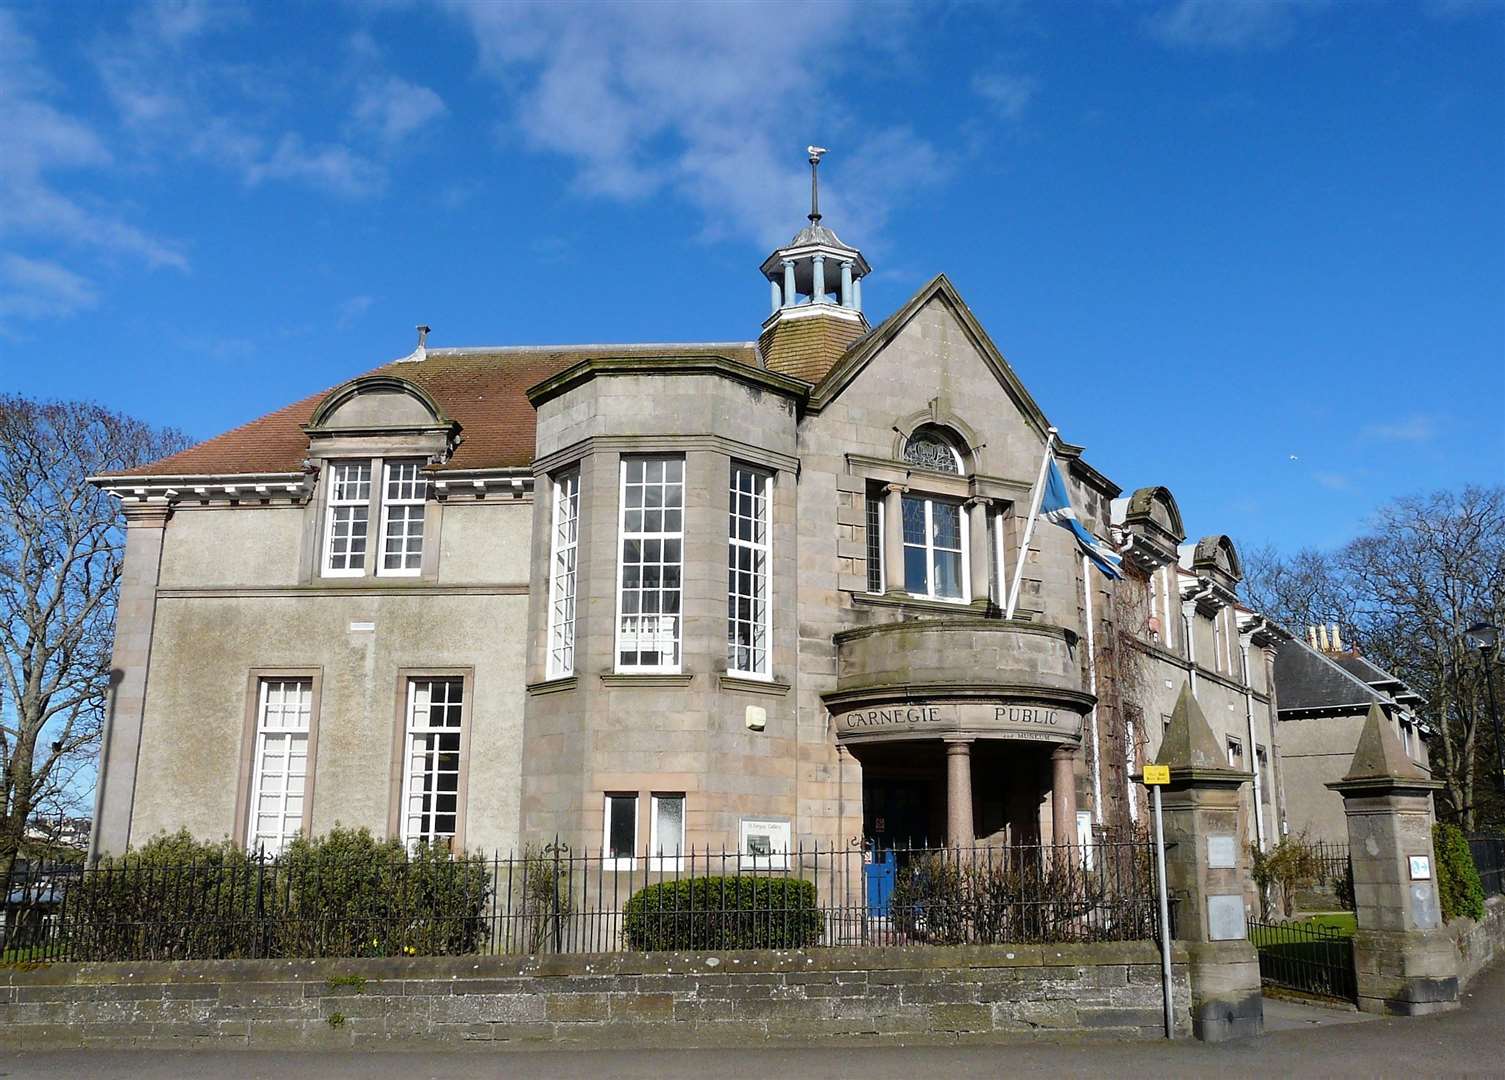 St Fergus Gallery sits on the top floor of the old Carnegie library building on Sinclair Terrace. Picture: Alan Hendry